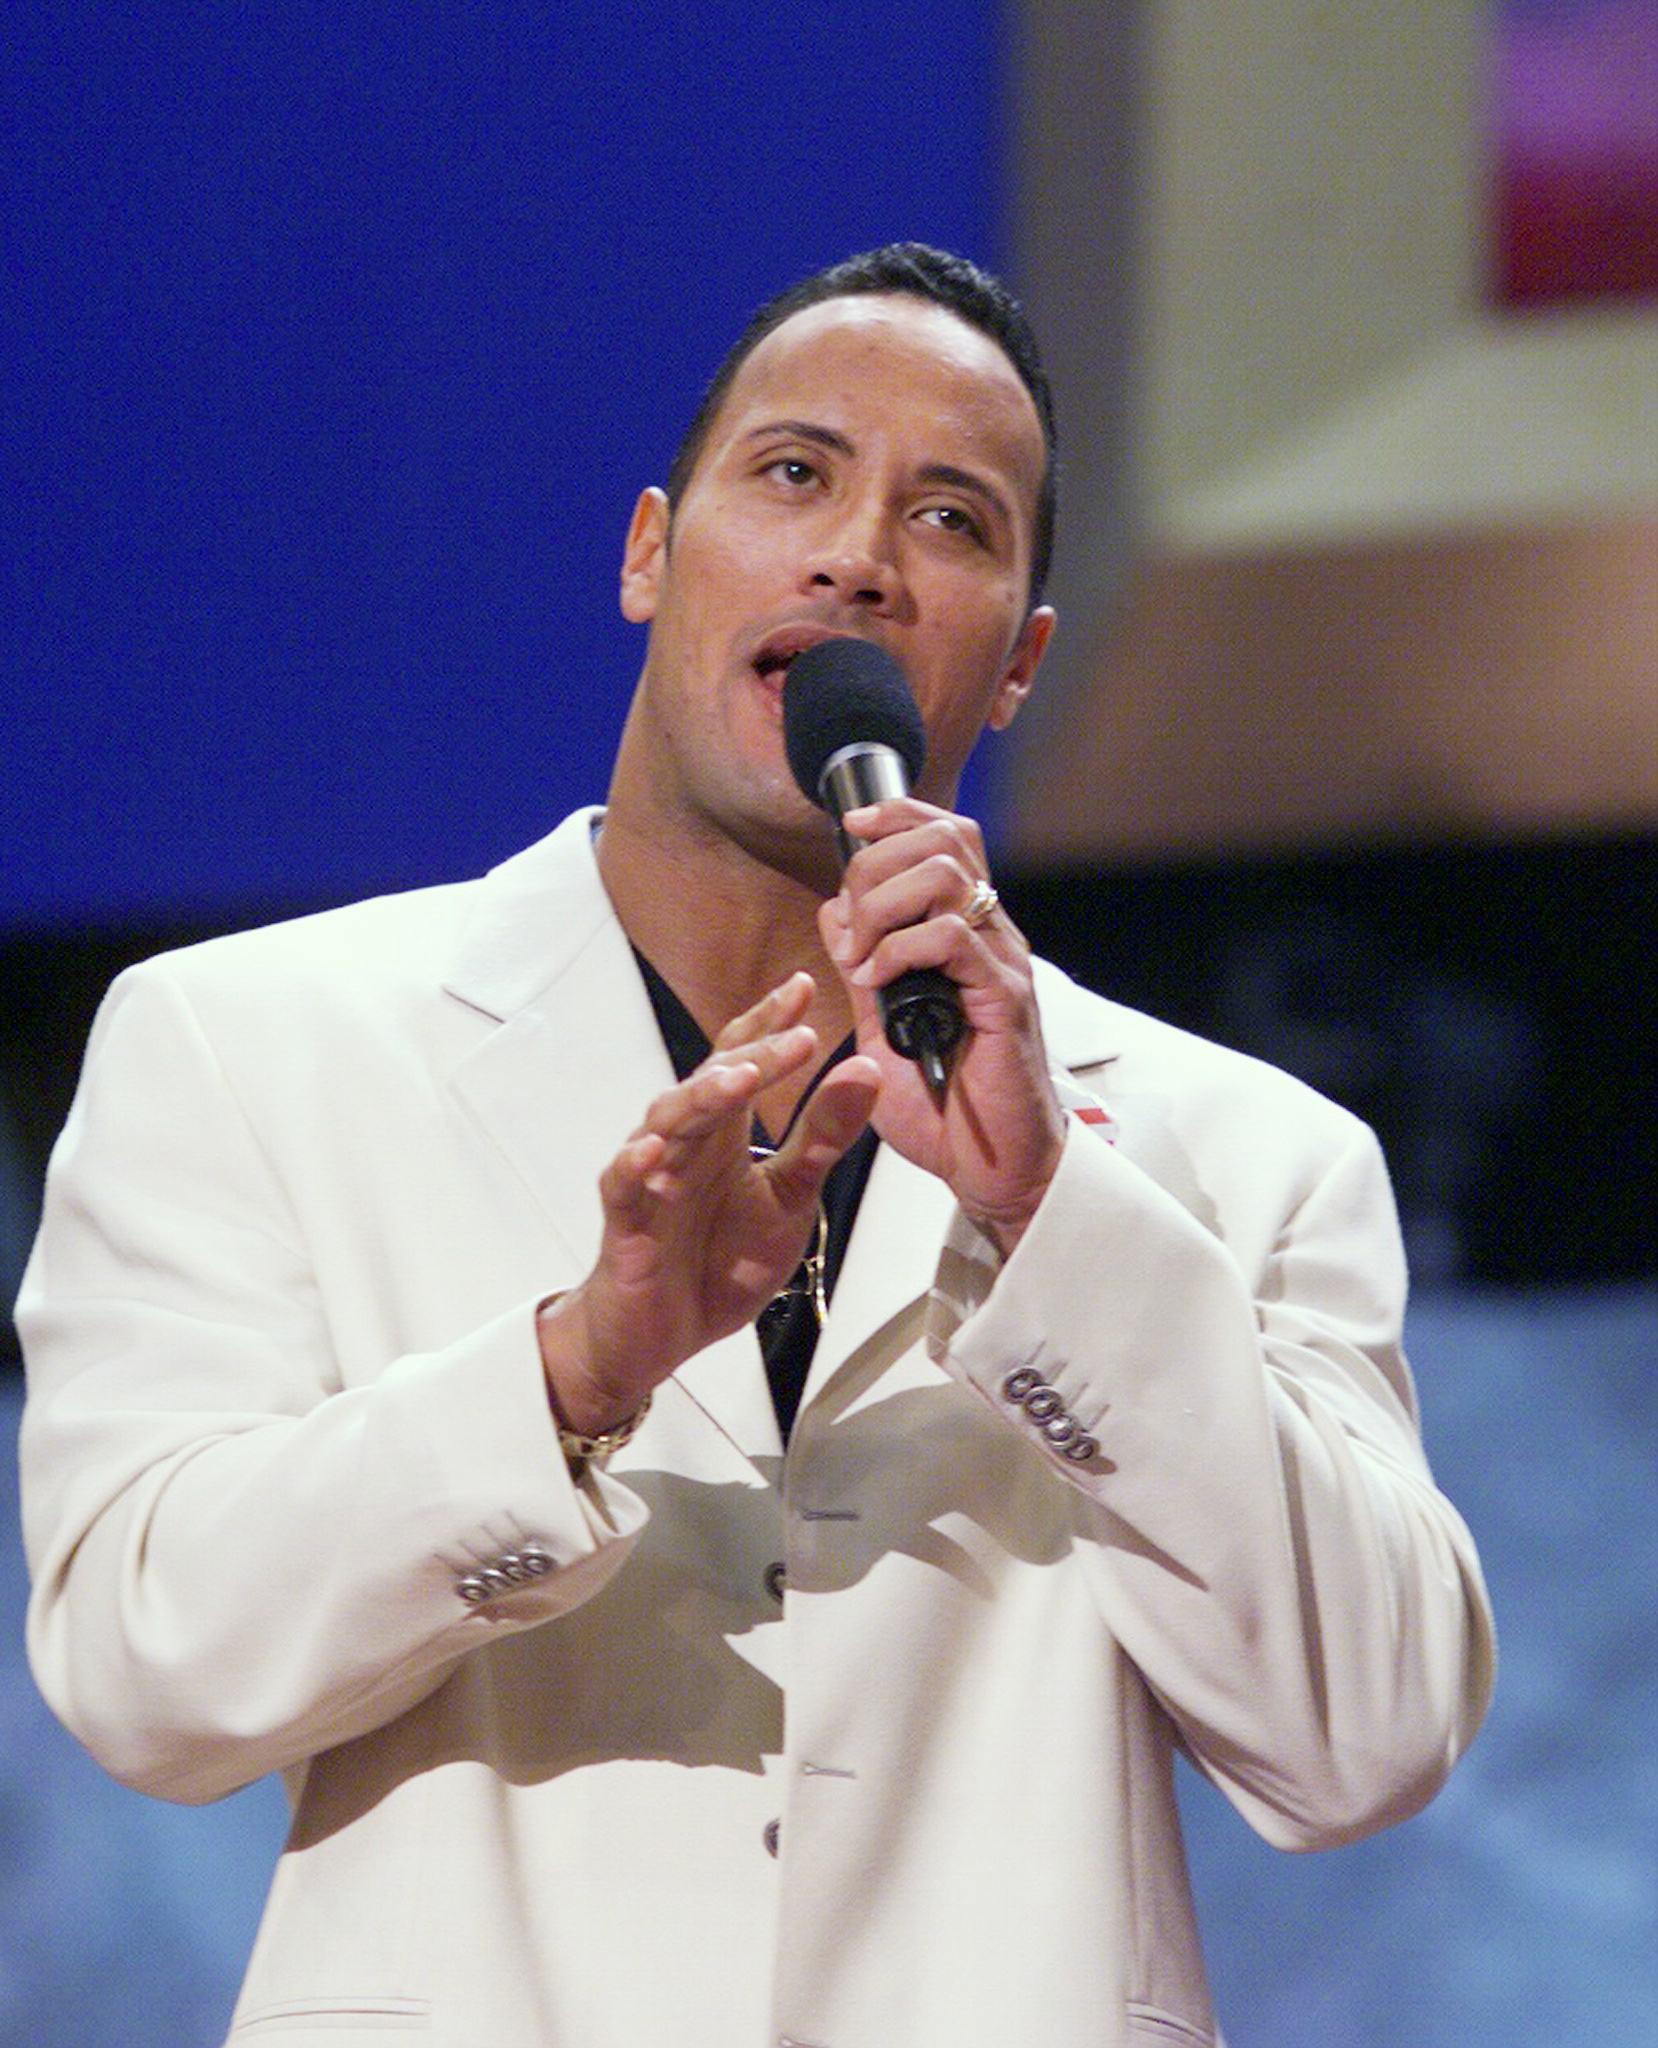 Man in white suit performing on stage with a microphone